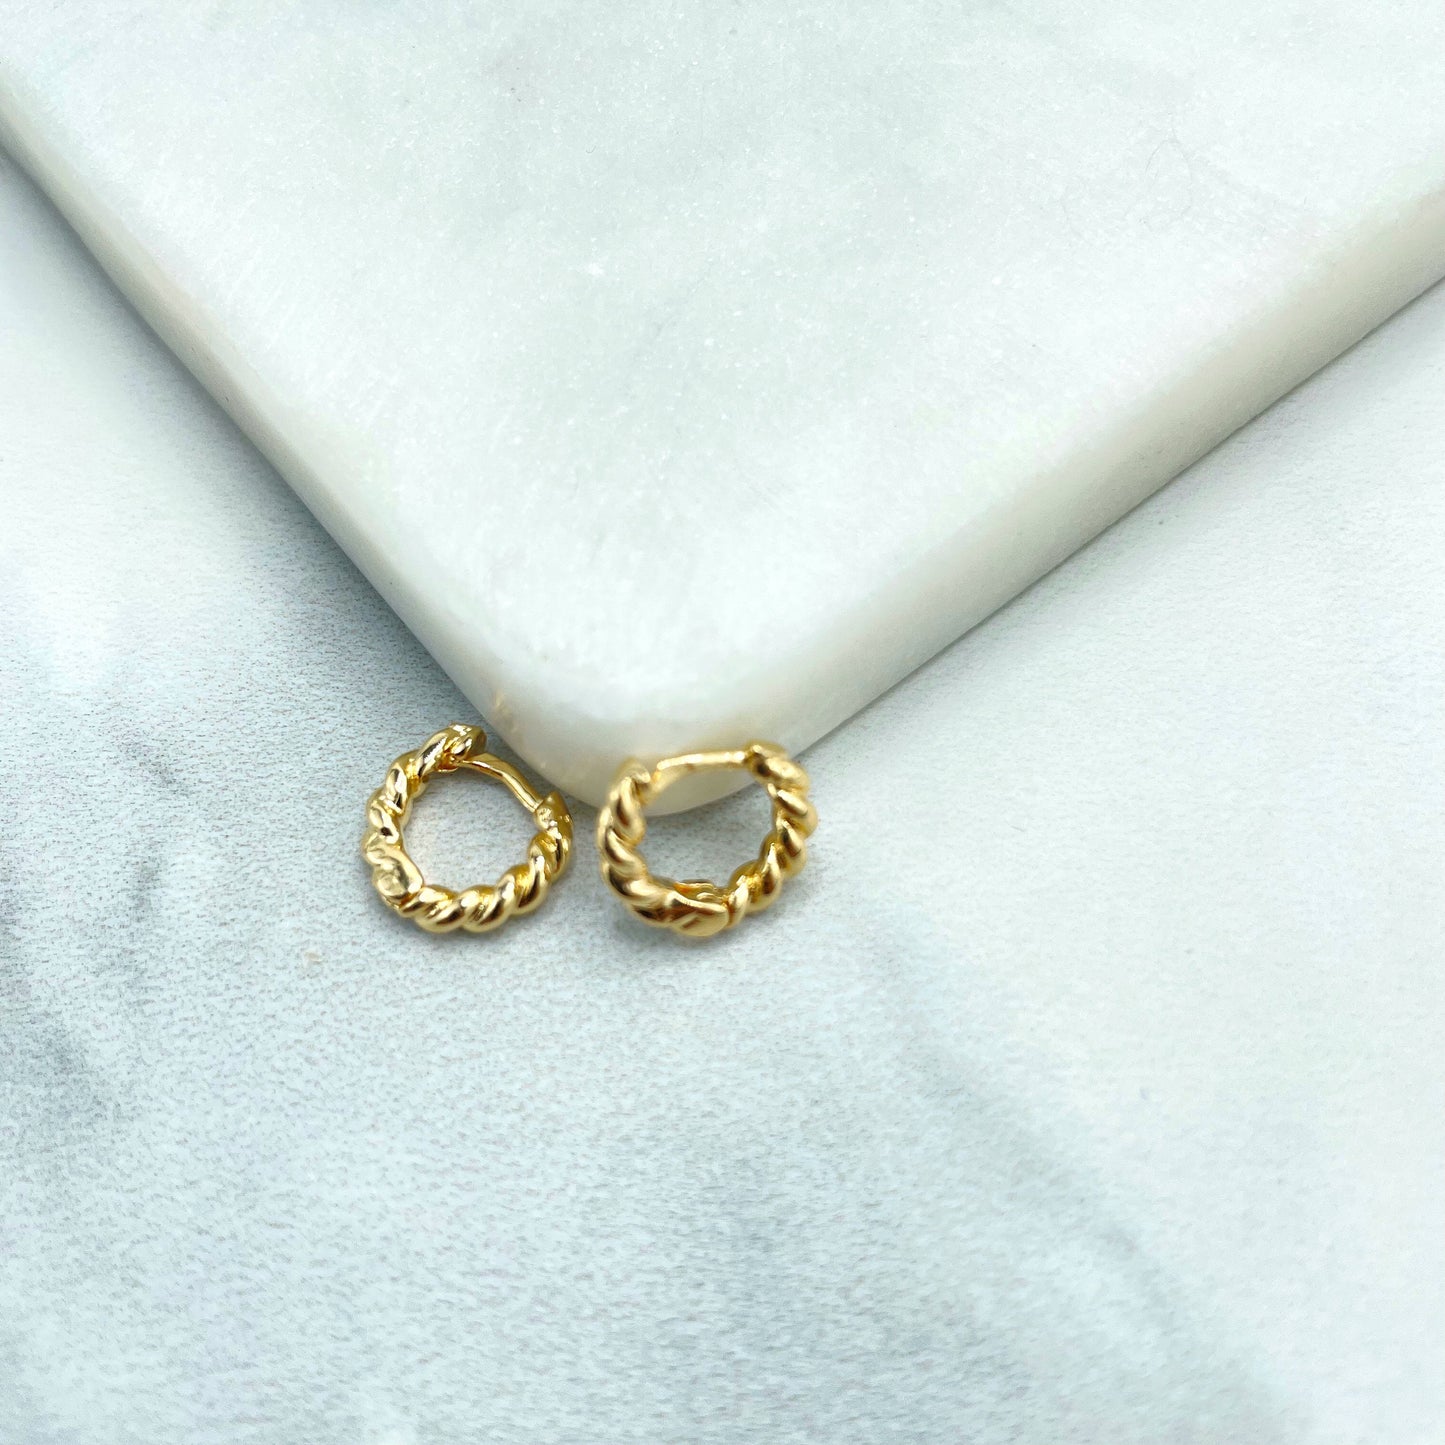 18k Gold Filled 8mm, 5mm or 2mm Croissant Design Hoops Earrings Wholesale Jewelry Making Supplies